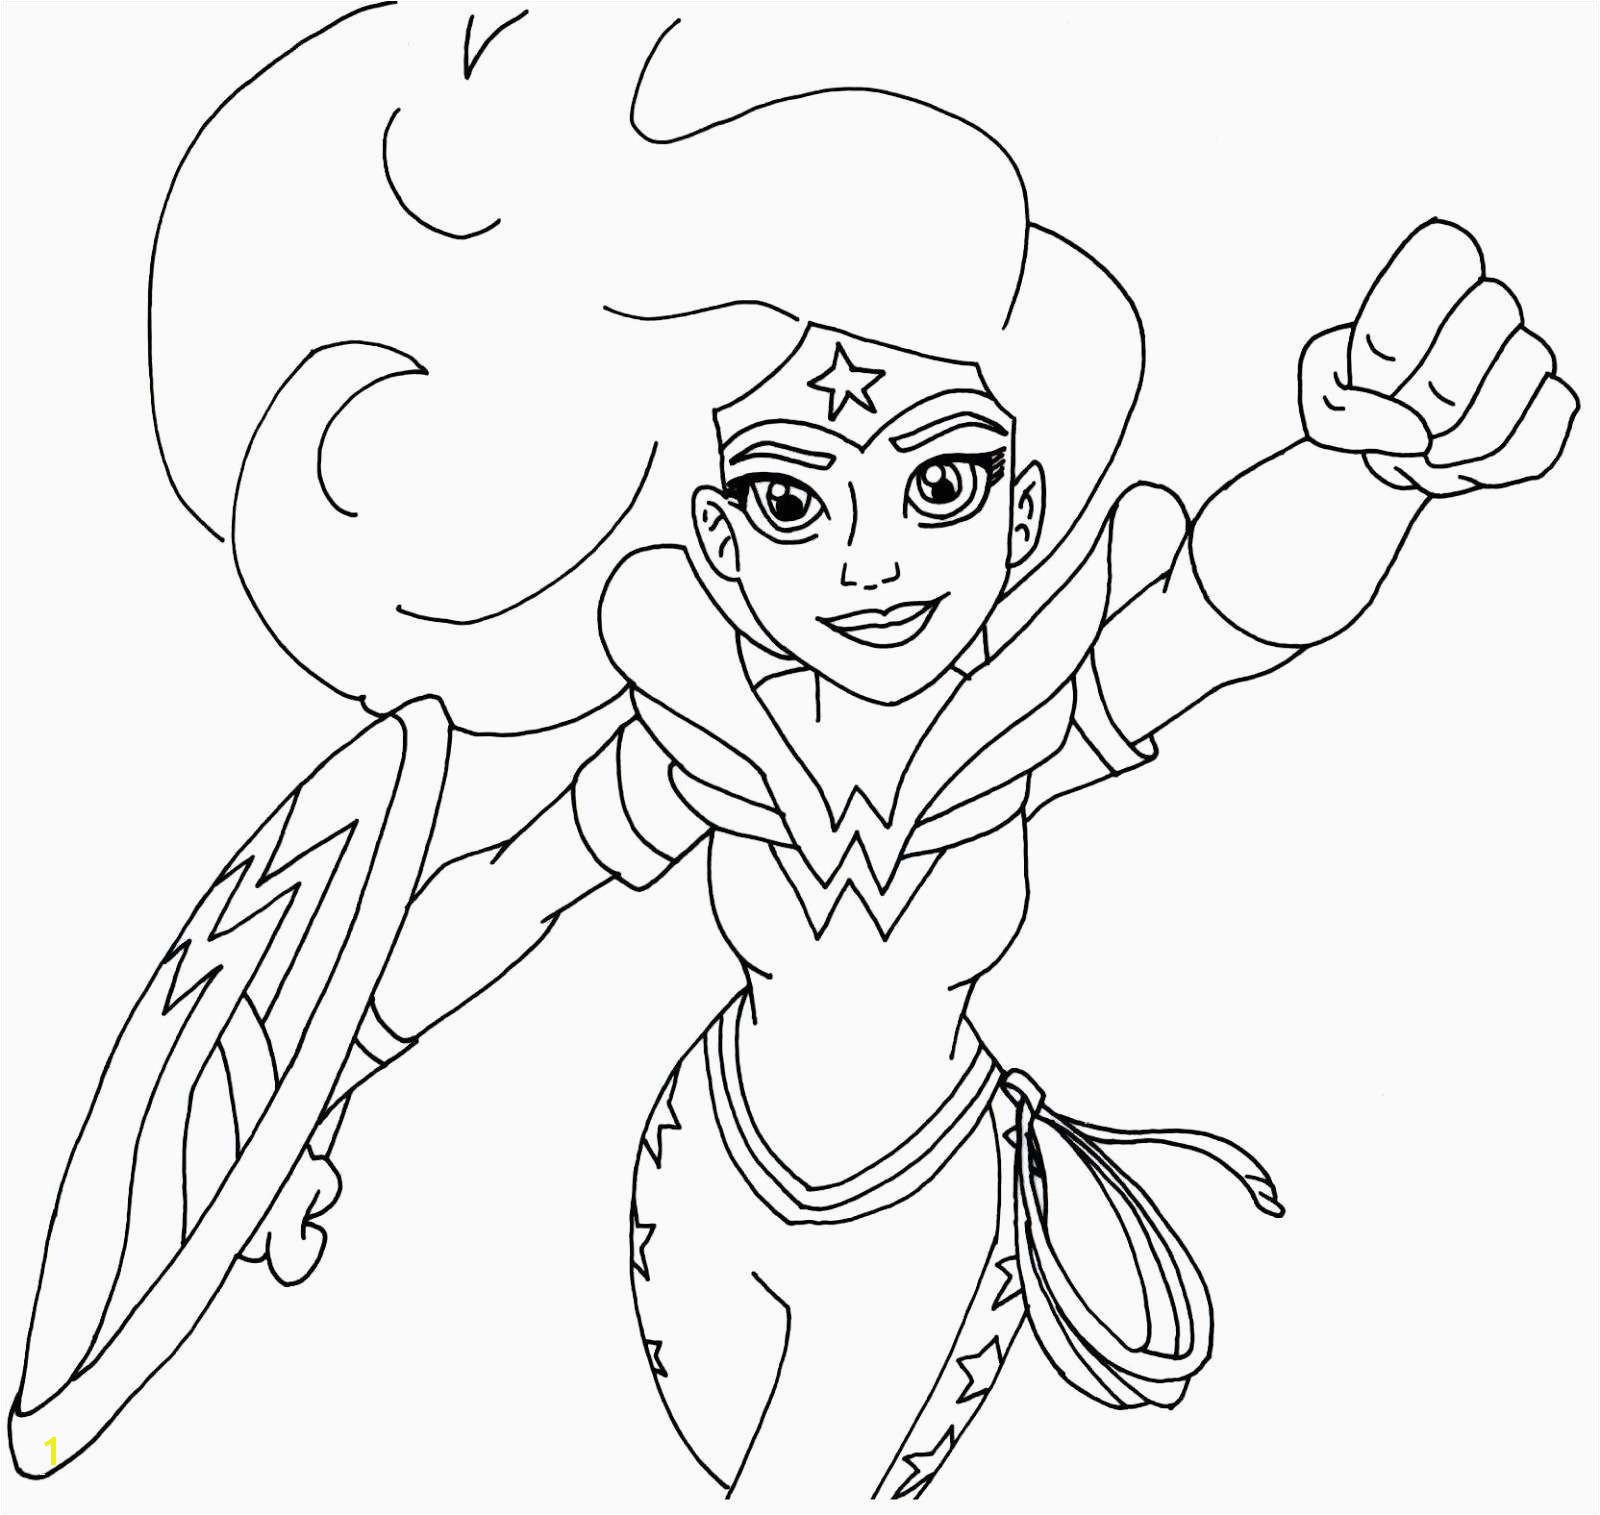 Anime Boy and Girl Coloring Pages Download